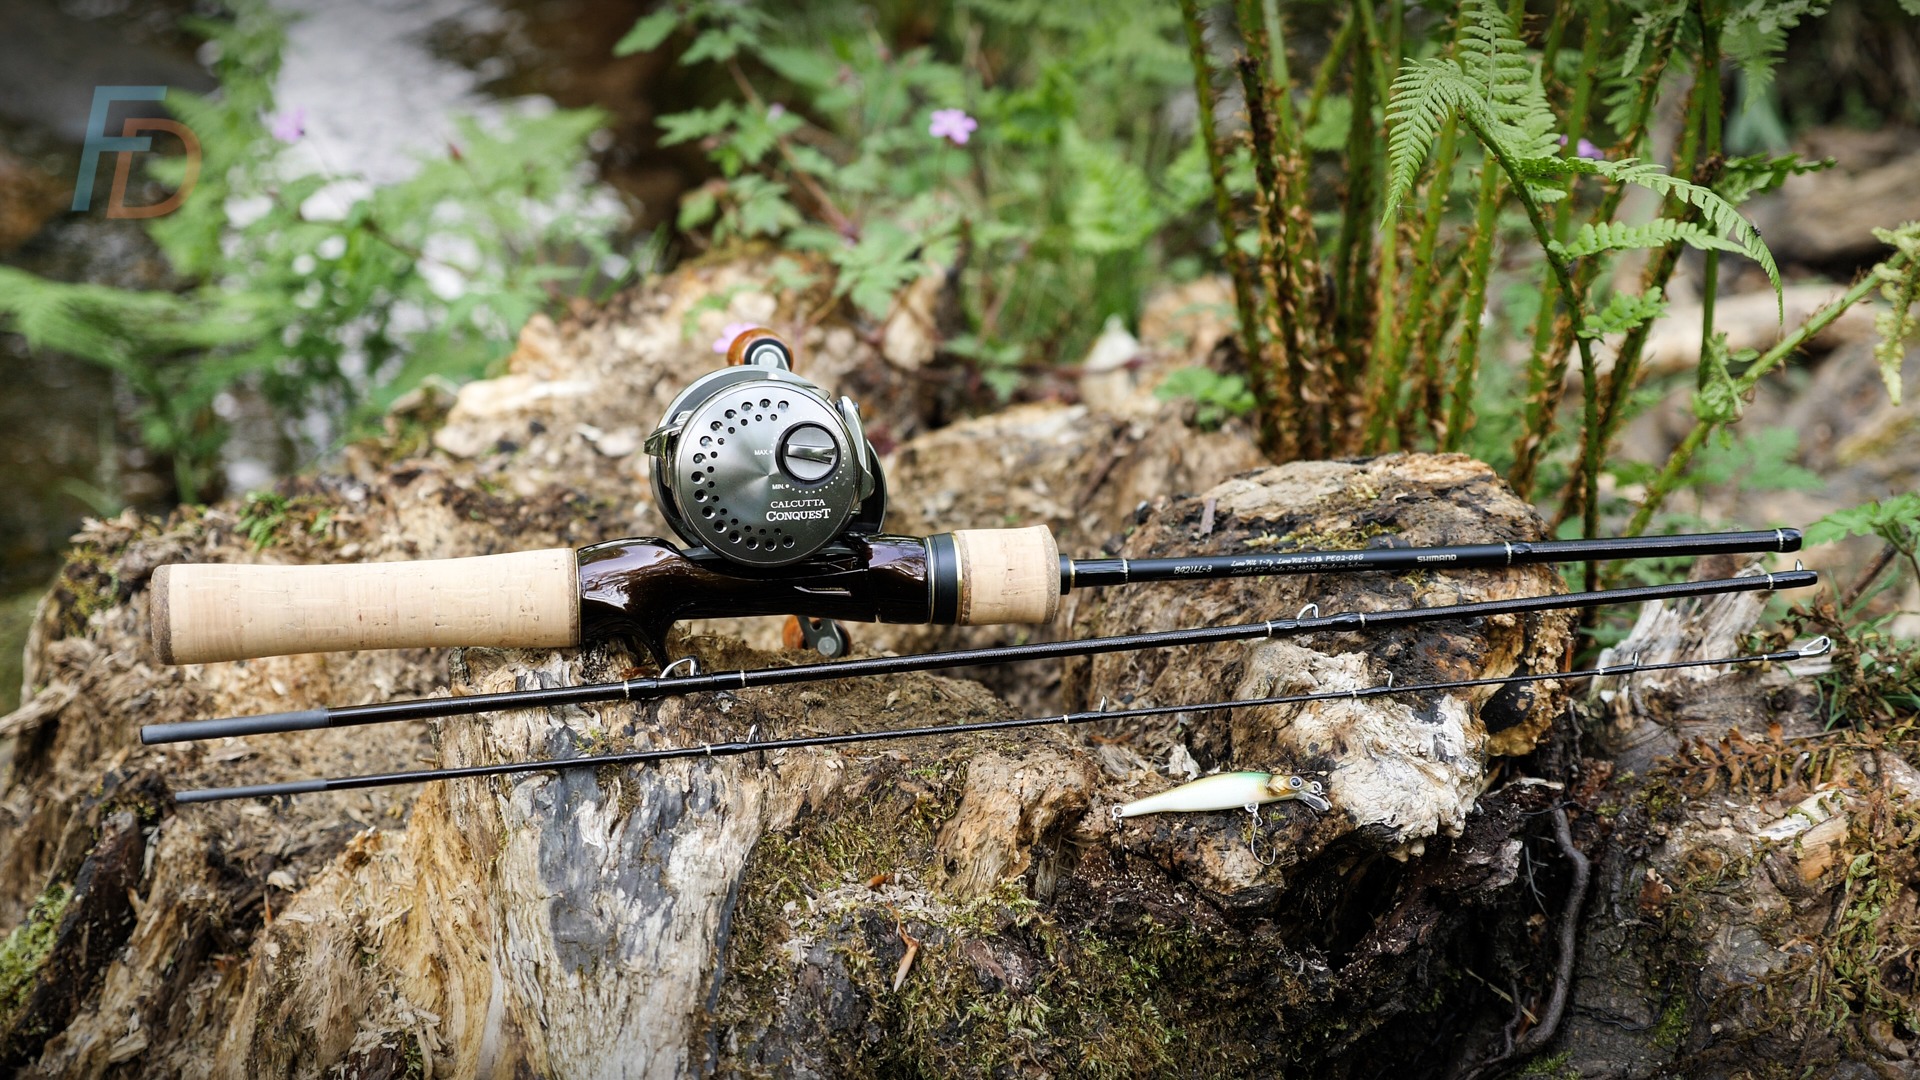 How to Oil a Baitcasting Fishing Reel: Essential Tips for Smooth Casting